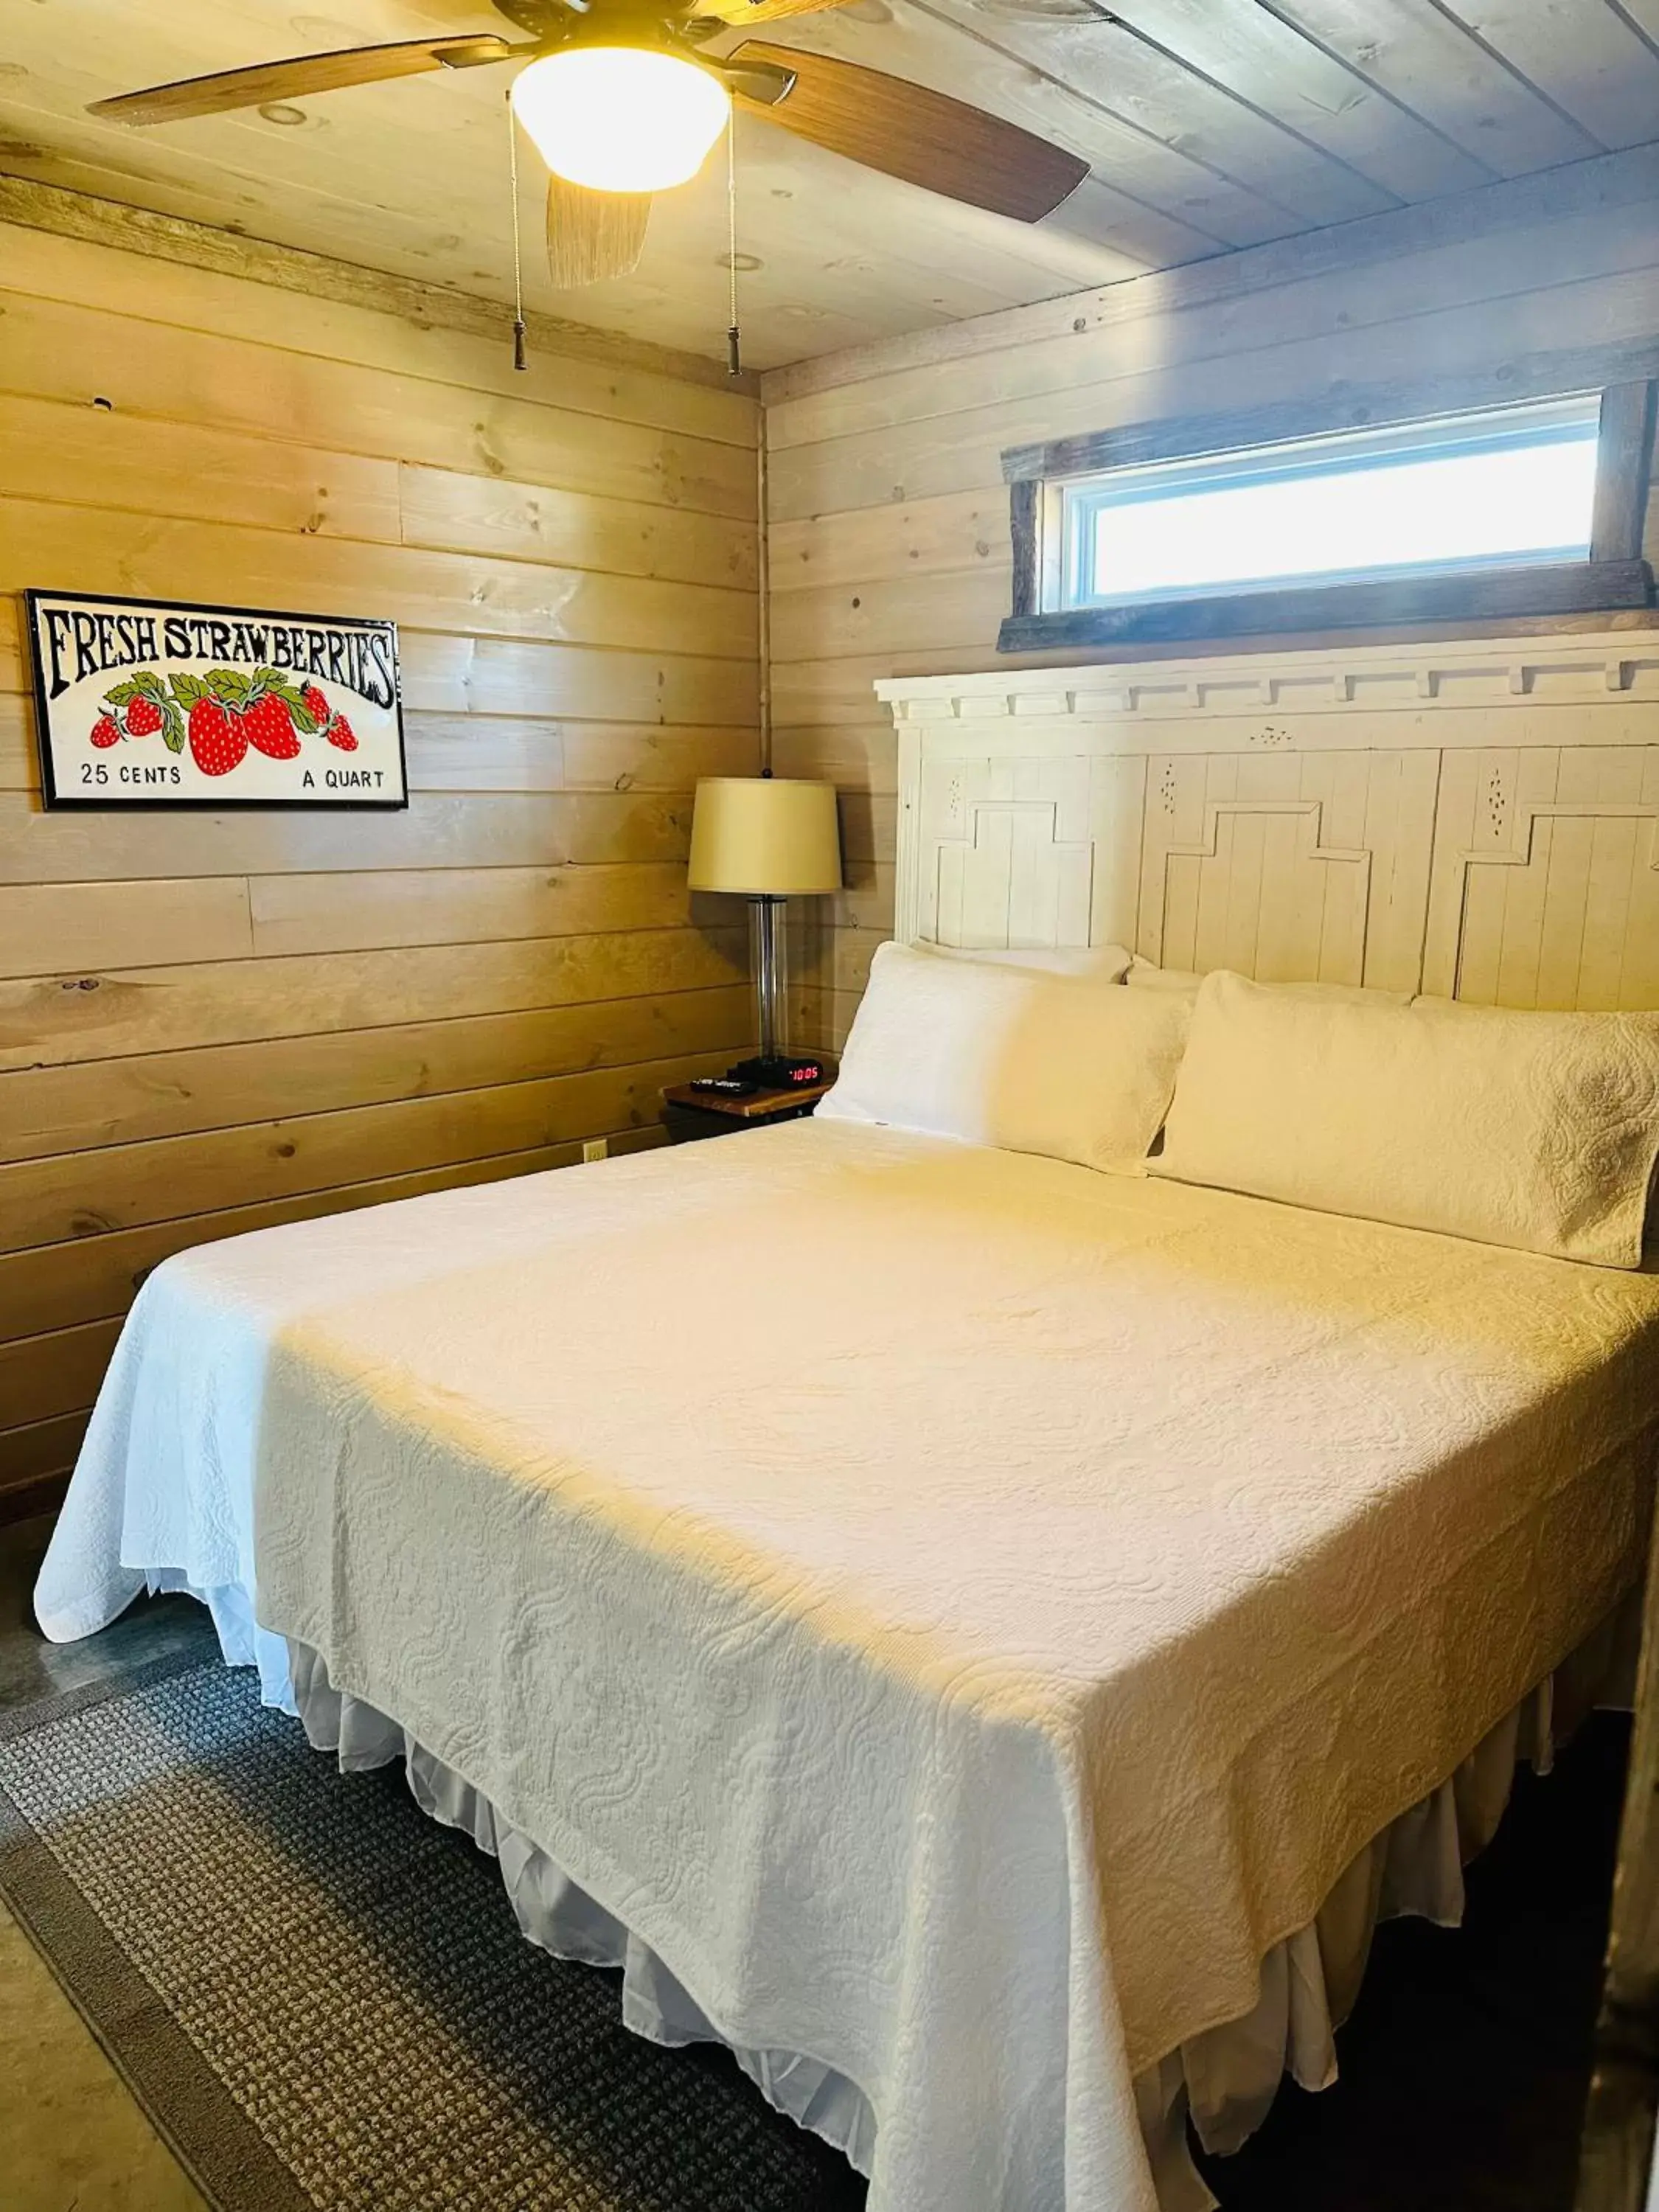 Bed in Knotty Squirrel Cabins